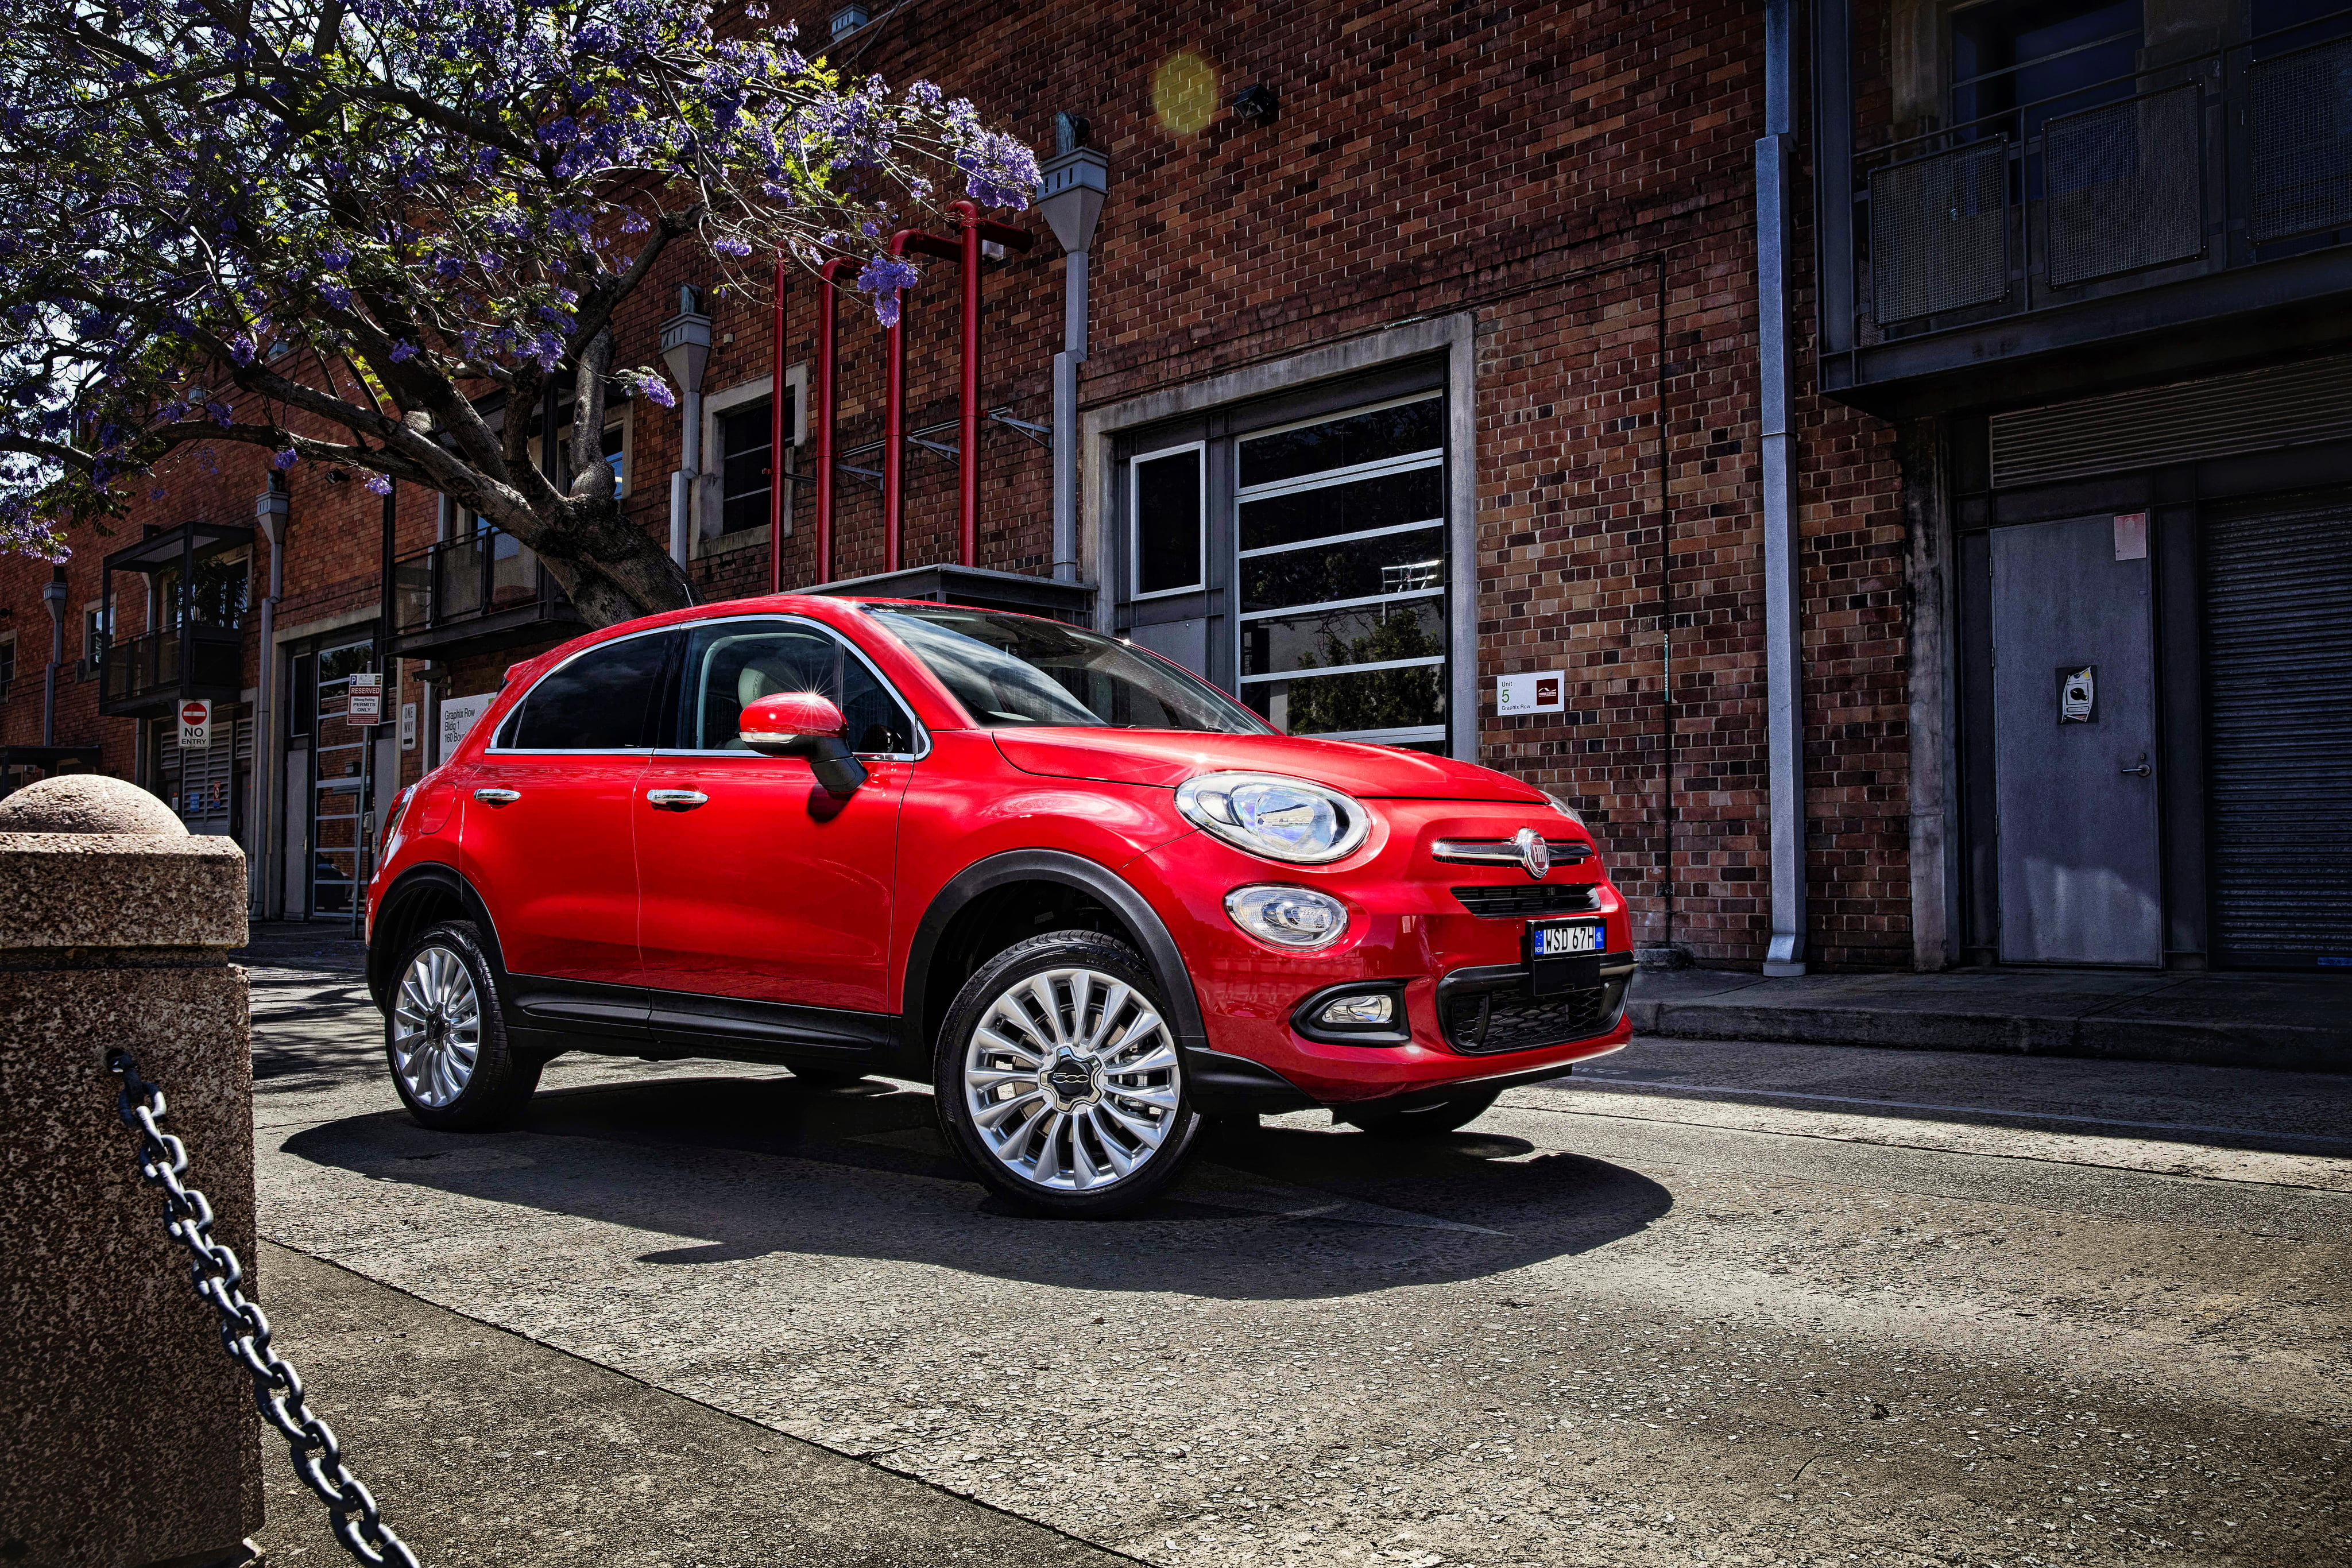 red SUV, fiat, 500x, side view, car, land Vehicle, street, transportation